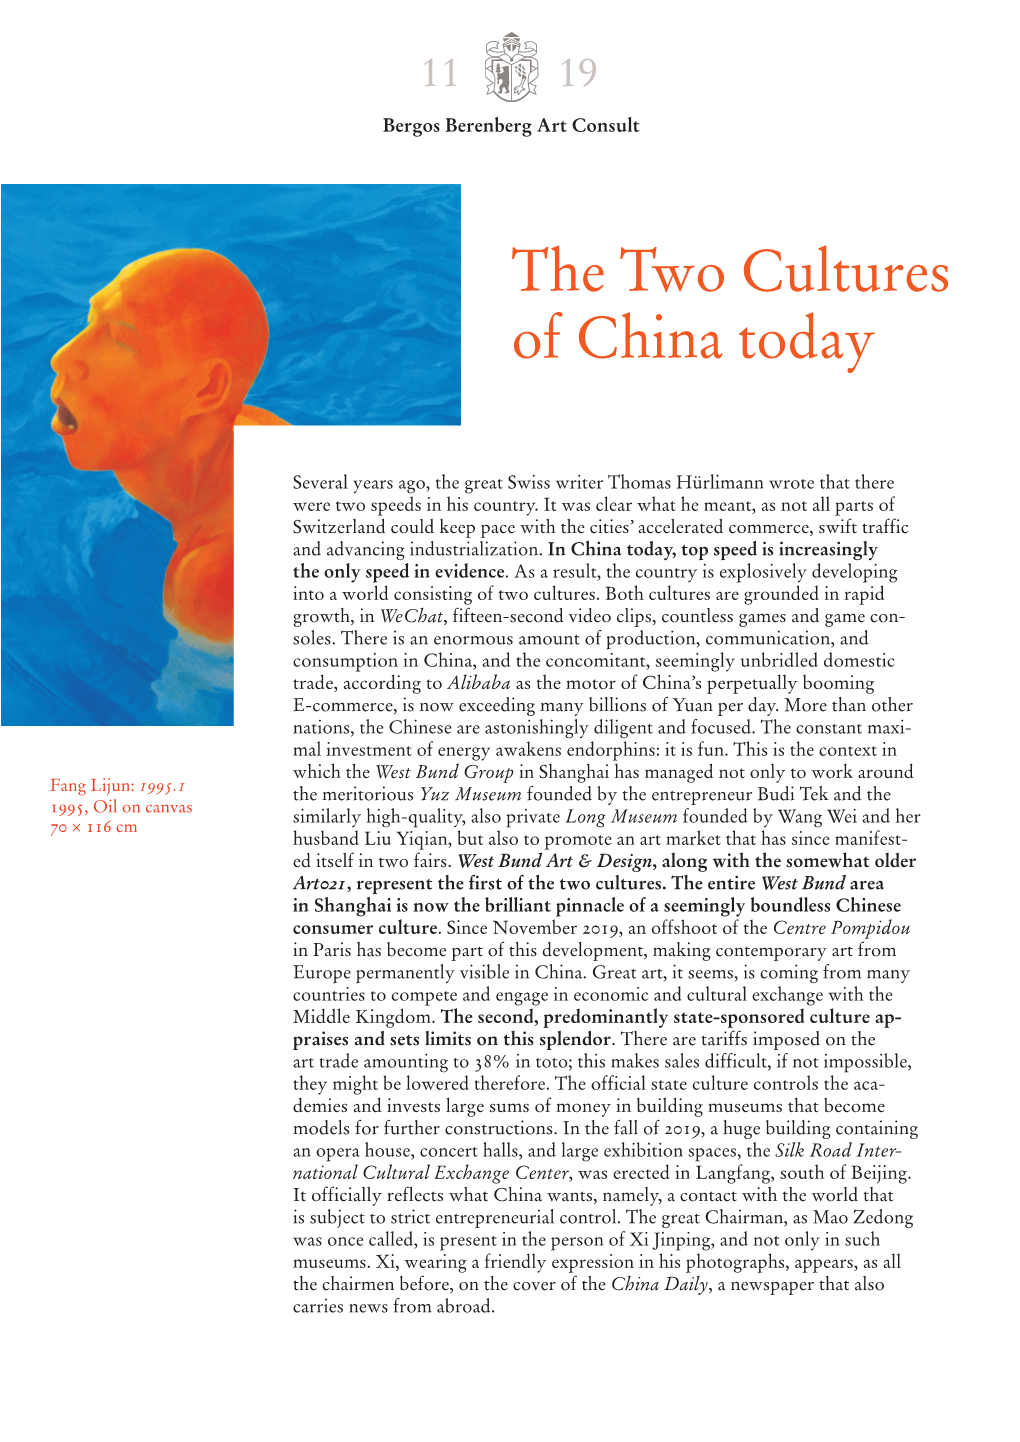 The Two Cultures of China Today